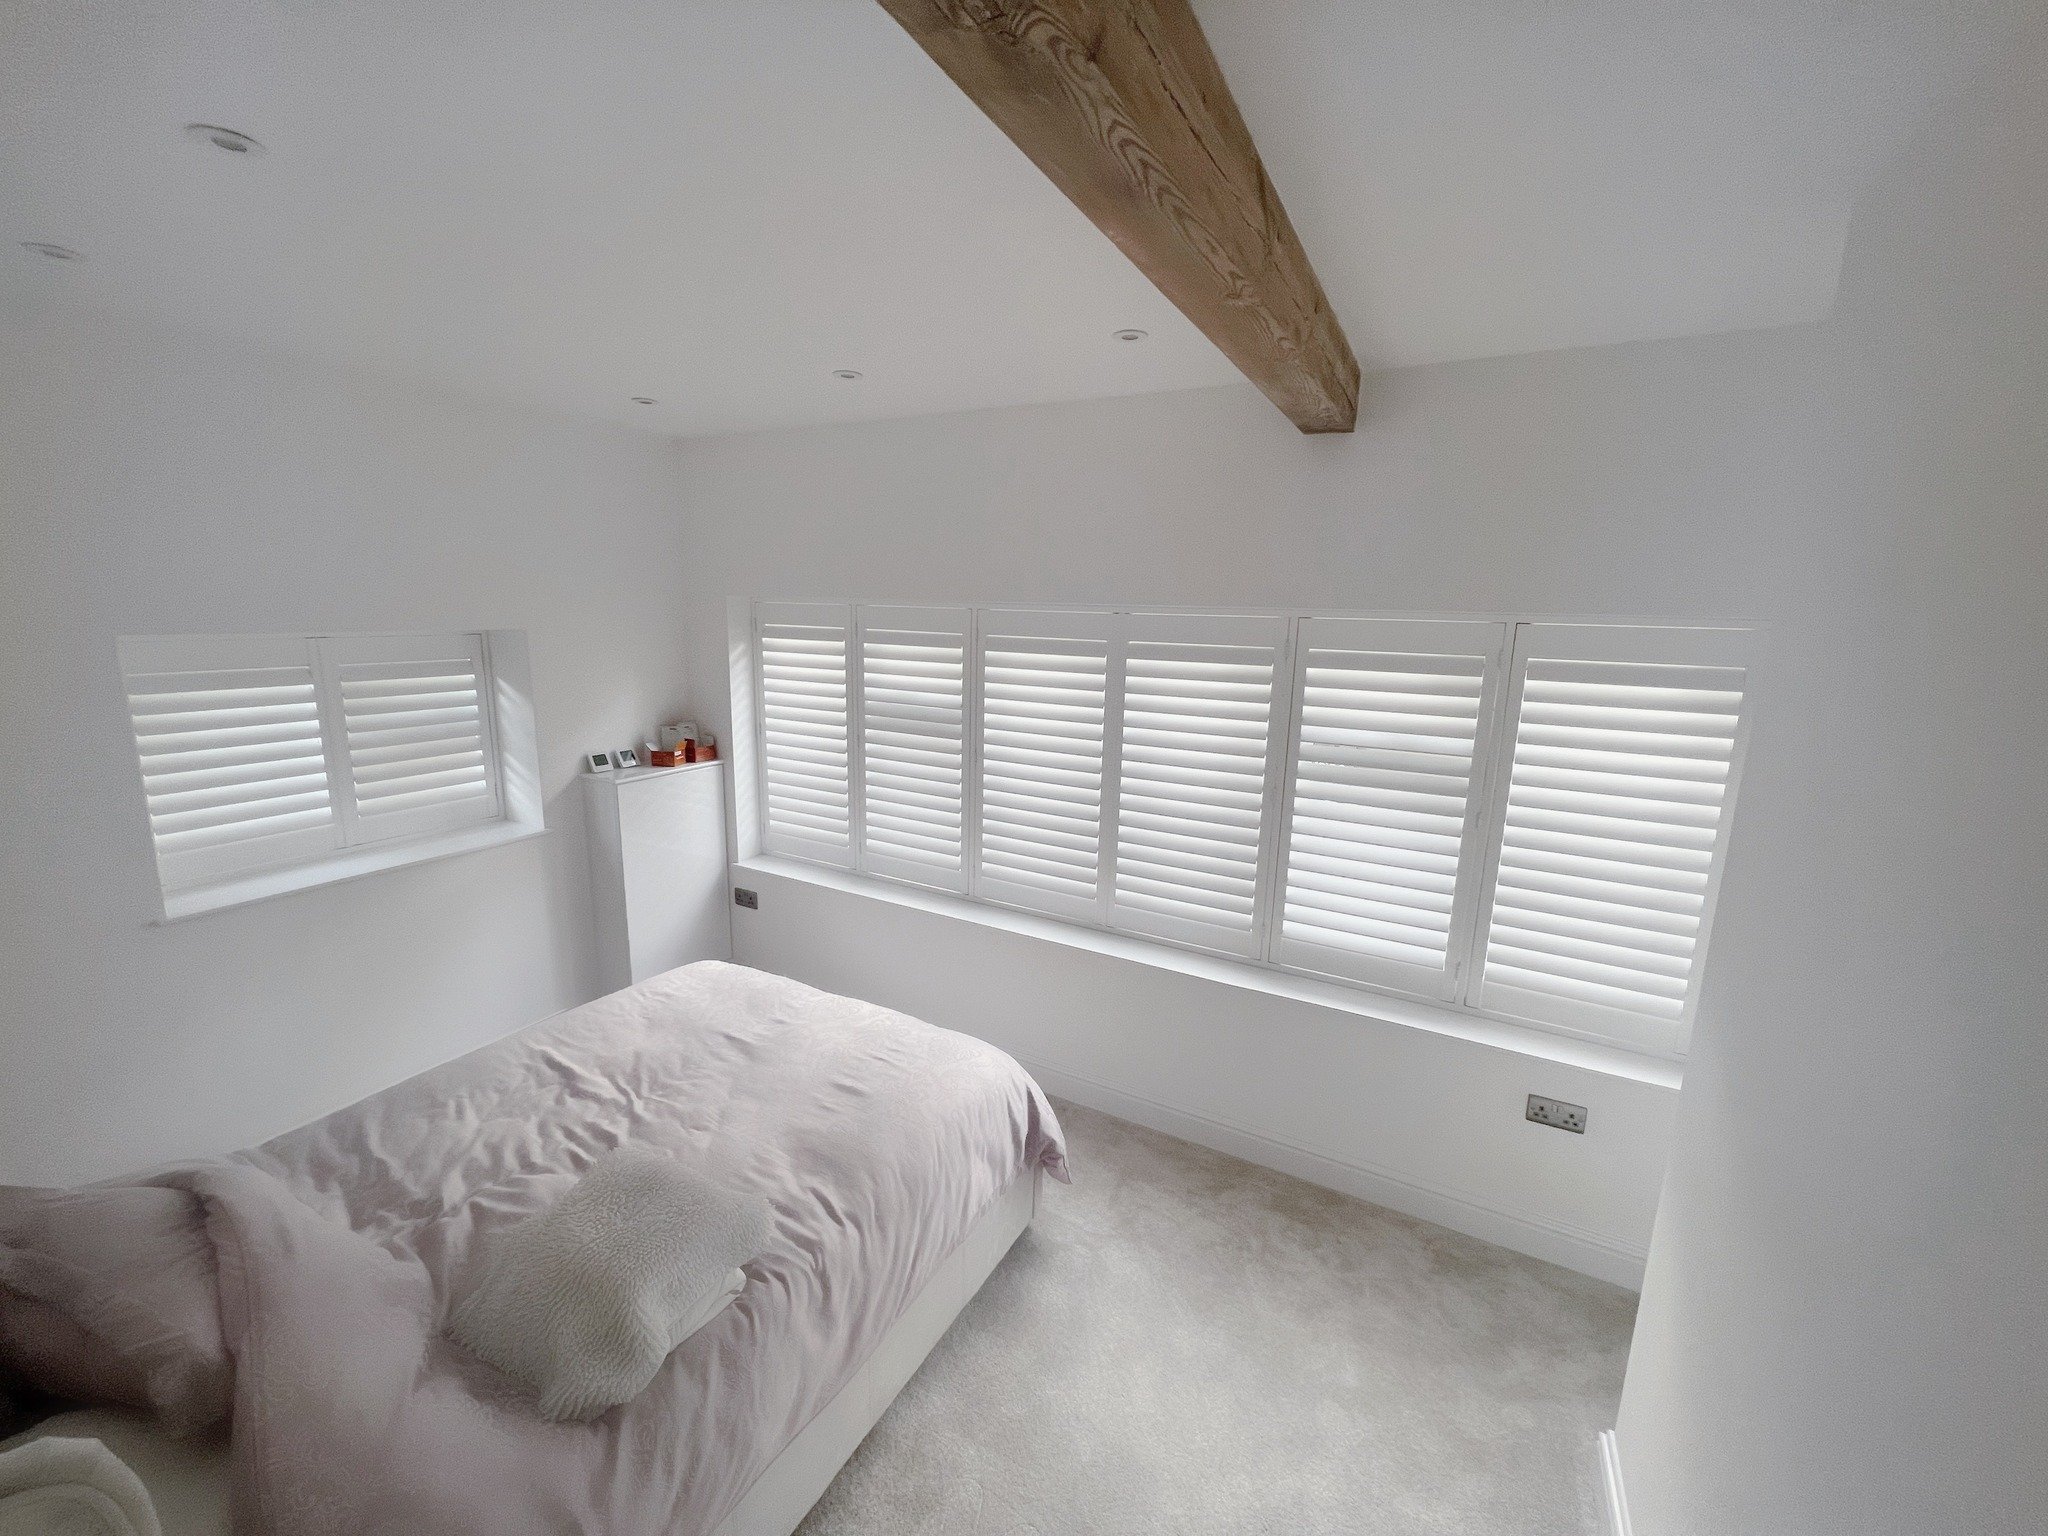 Transform Your Space with Elegance and Brightness! 

Our Full-Height Shutters in Pure White are The Epitome of Sophistication and Versatility. Not Only Do They Add a Touch of Timeless Charm to Any Room, but Their Crisp Colourway Reflects Light Beauti